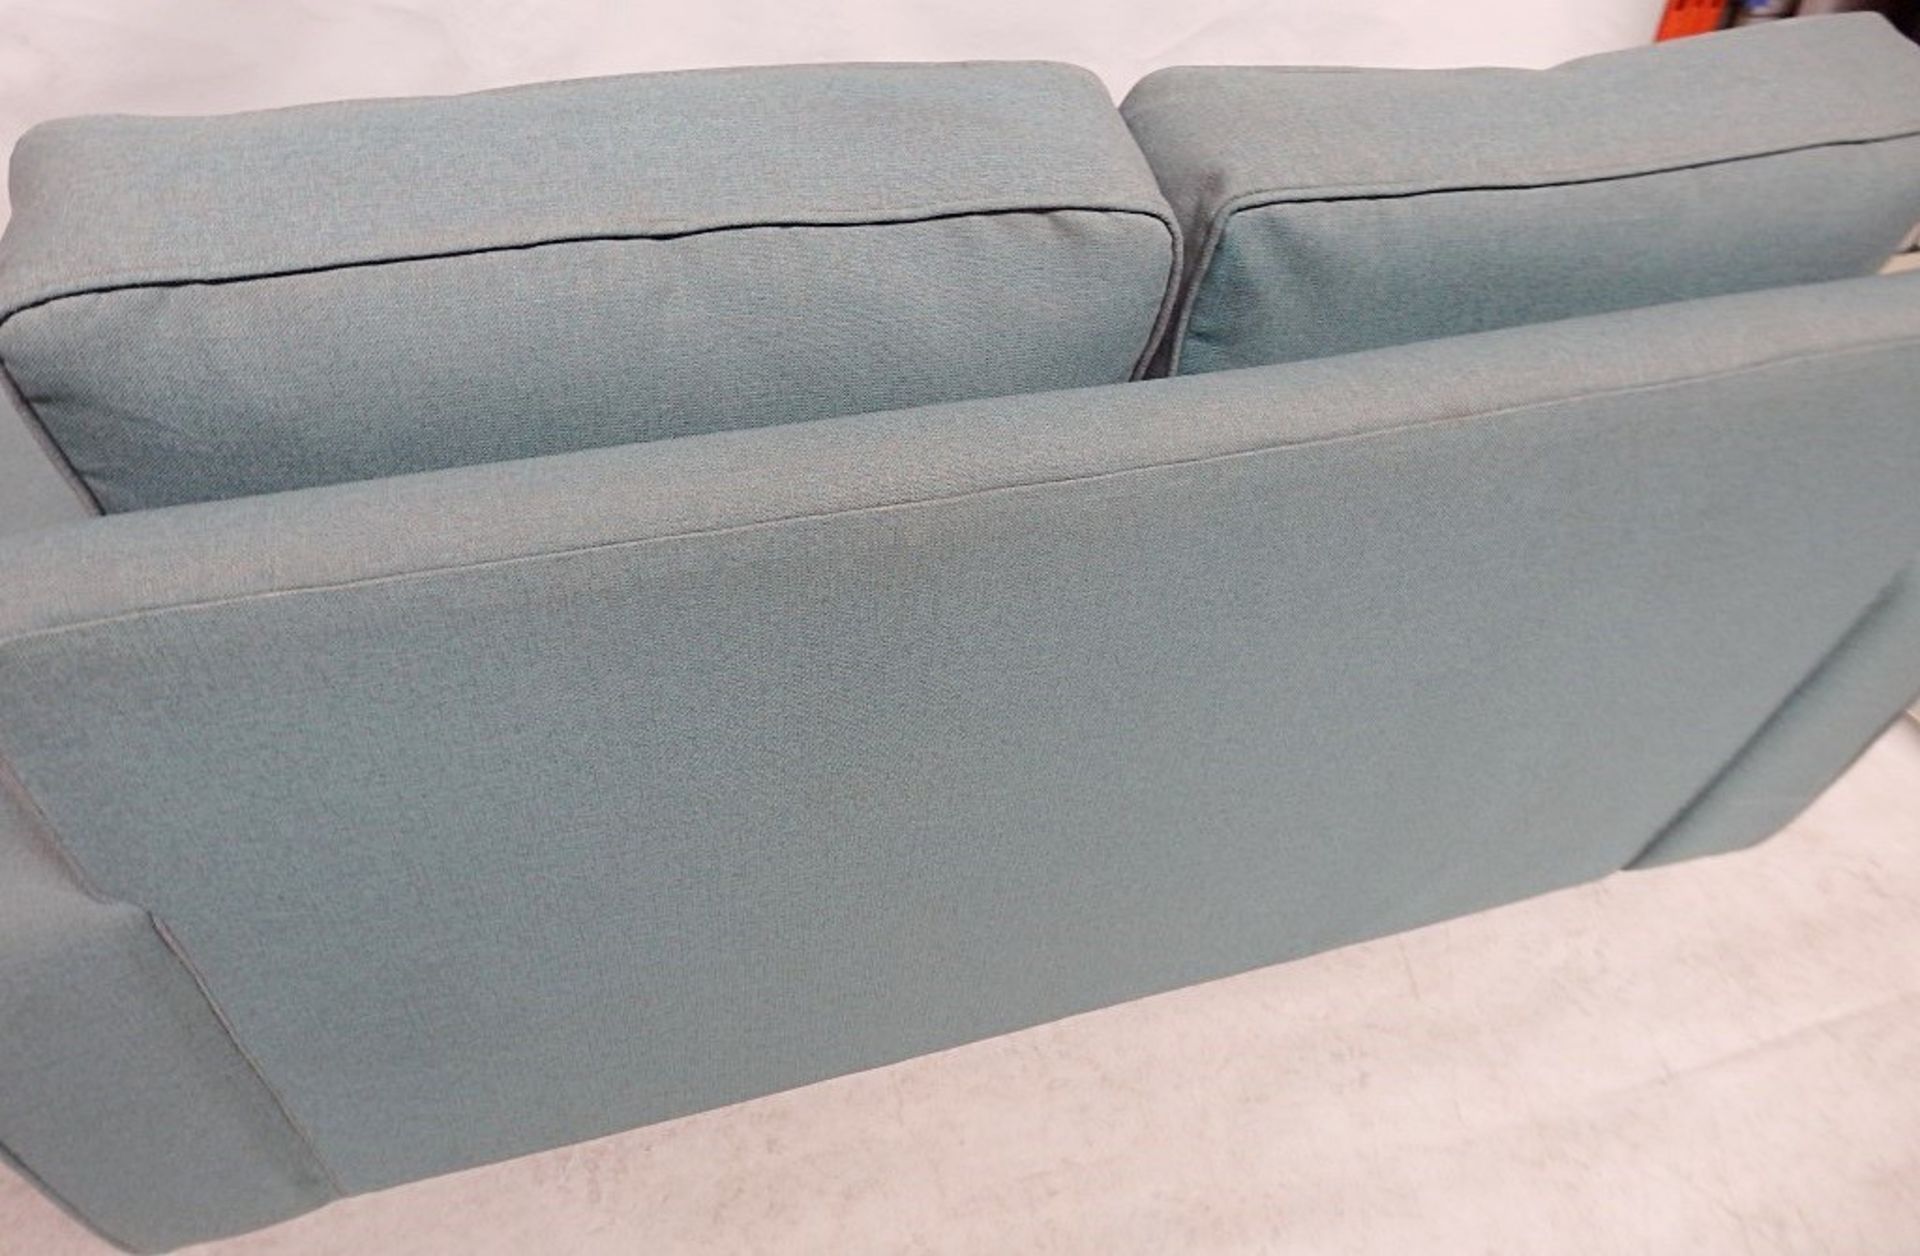 1 x Large Bespoke Turquoise Sofa - Expertly Built And Upholstered By British Craftsmen - Dimensions: - Image 5 of 6